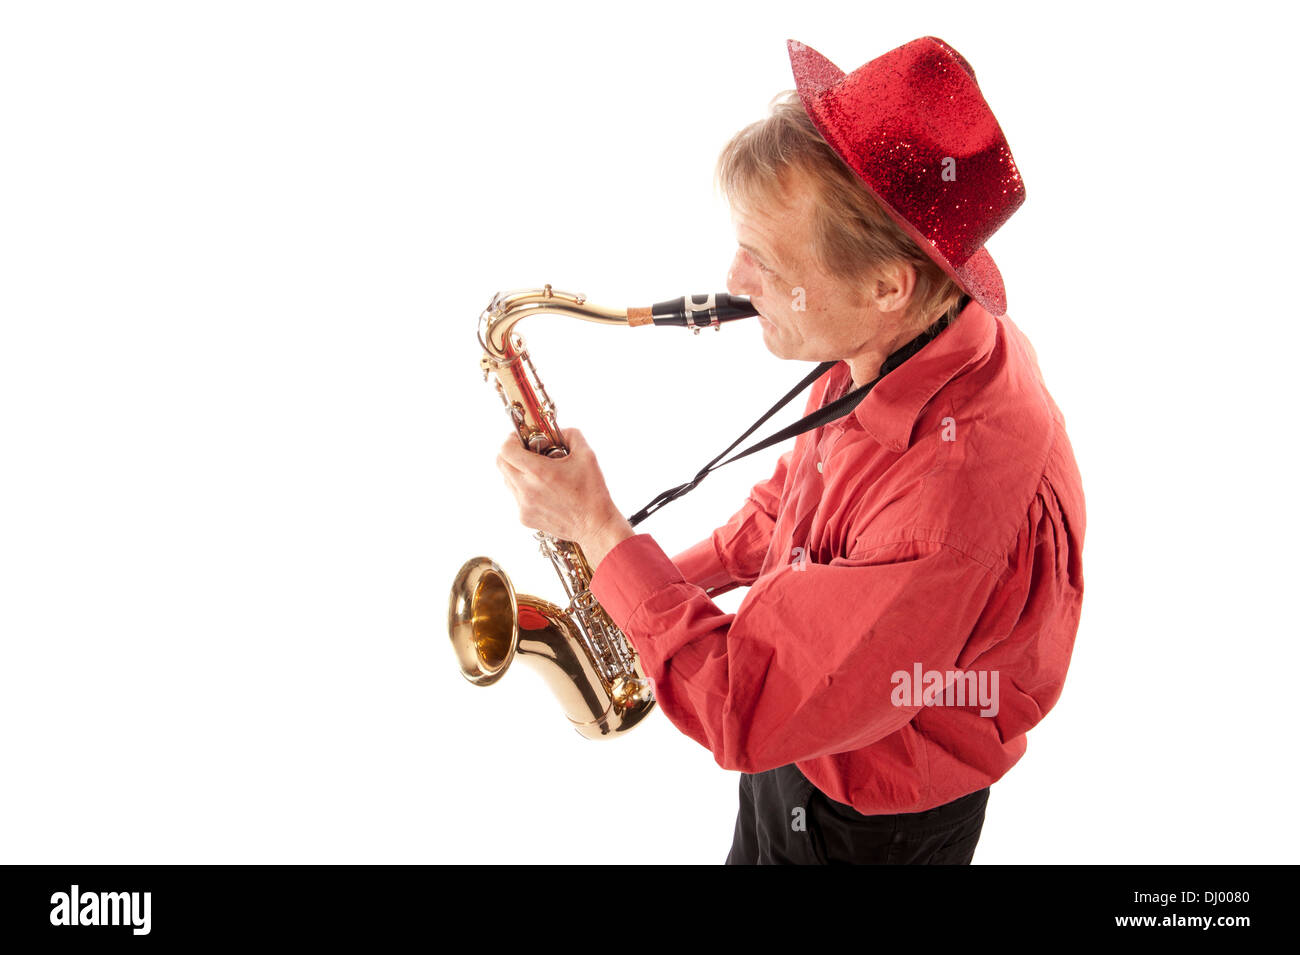 Male performer playing a brass tenor saxophone with silver valves and pearl buttons from above Stock Photo